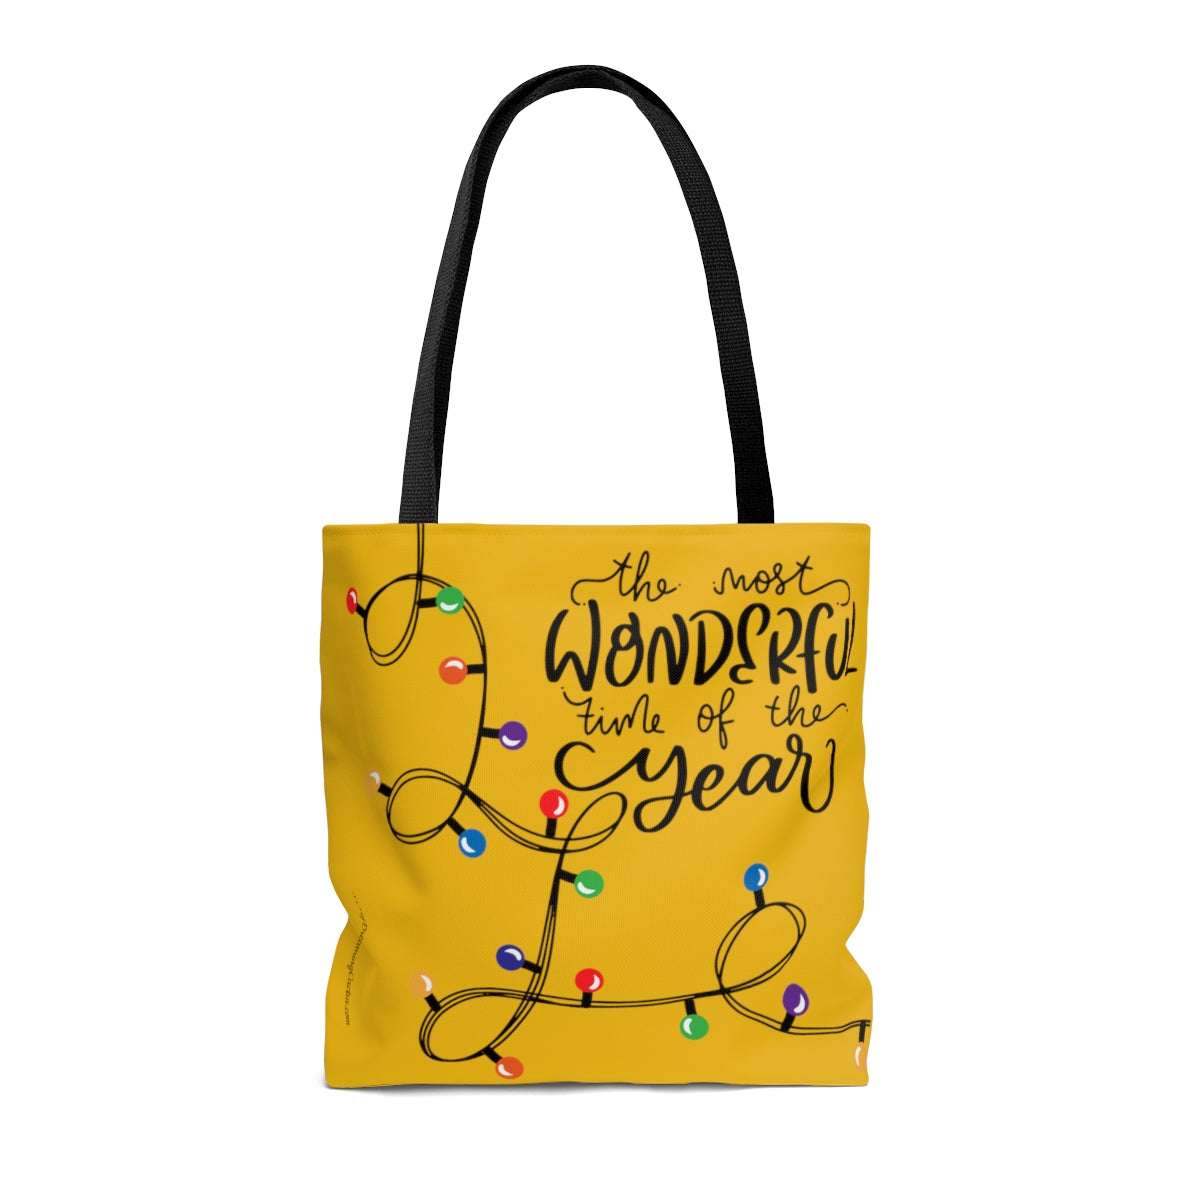 The Most Wonderful Time of Year Gold Tote Bag - Travel Grocery Carry-on